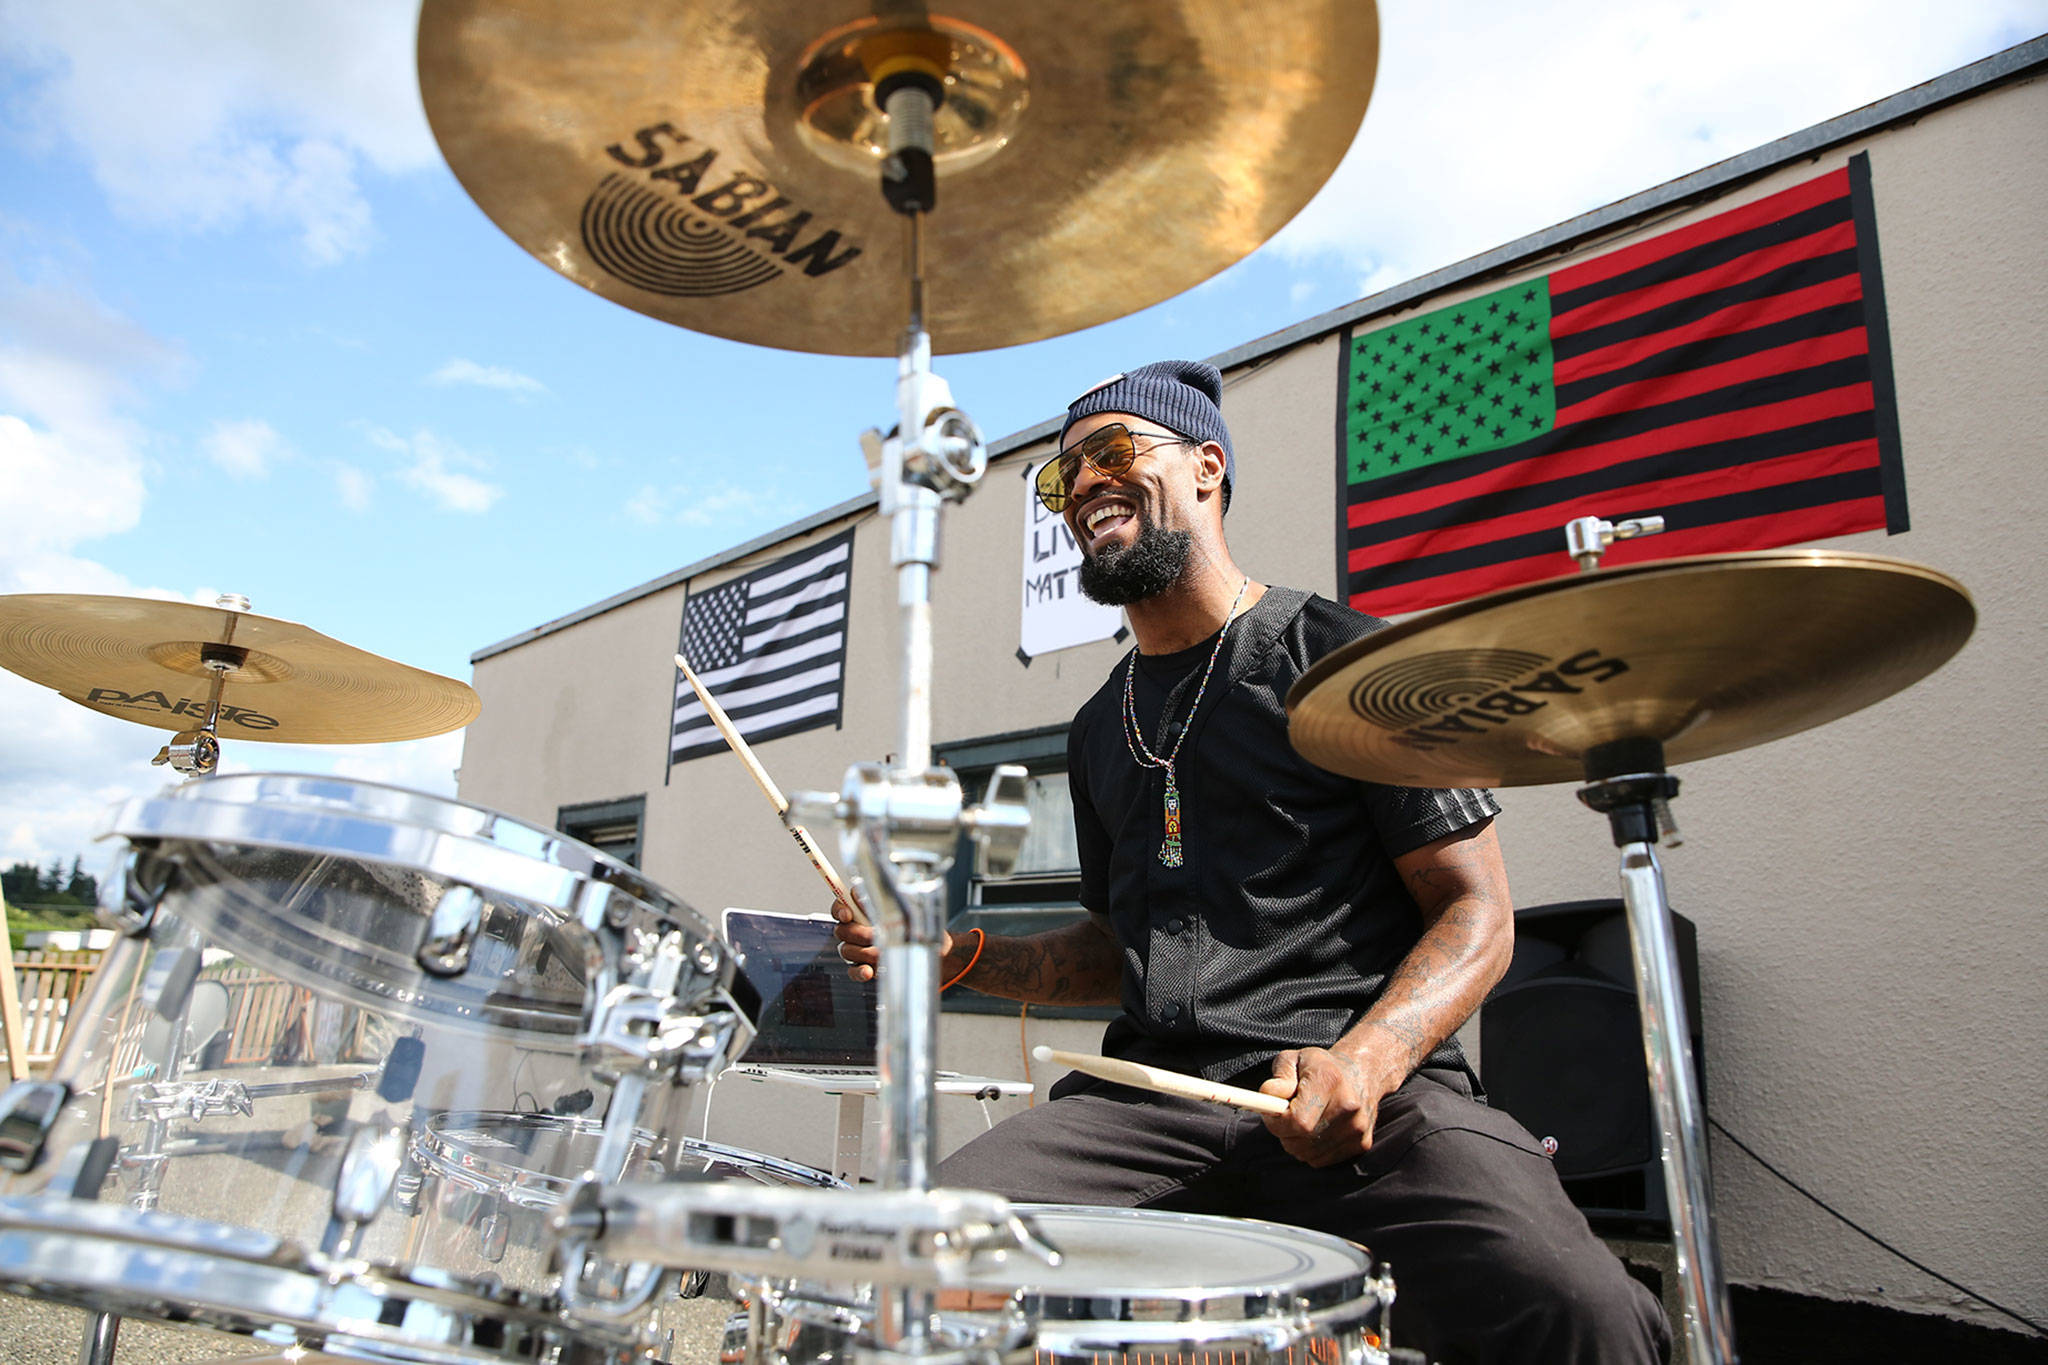 Chris Anderson plays the drums on a rooftop as part of the weekly Black Lives Matter rally in Marysville on July 4. (Kevin Clark / The Herald)